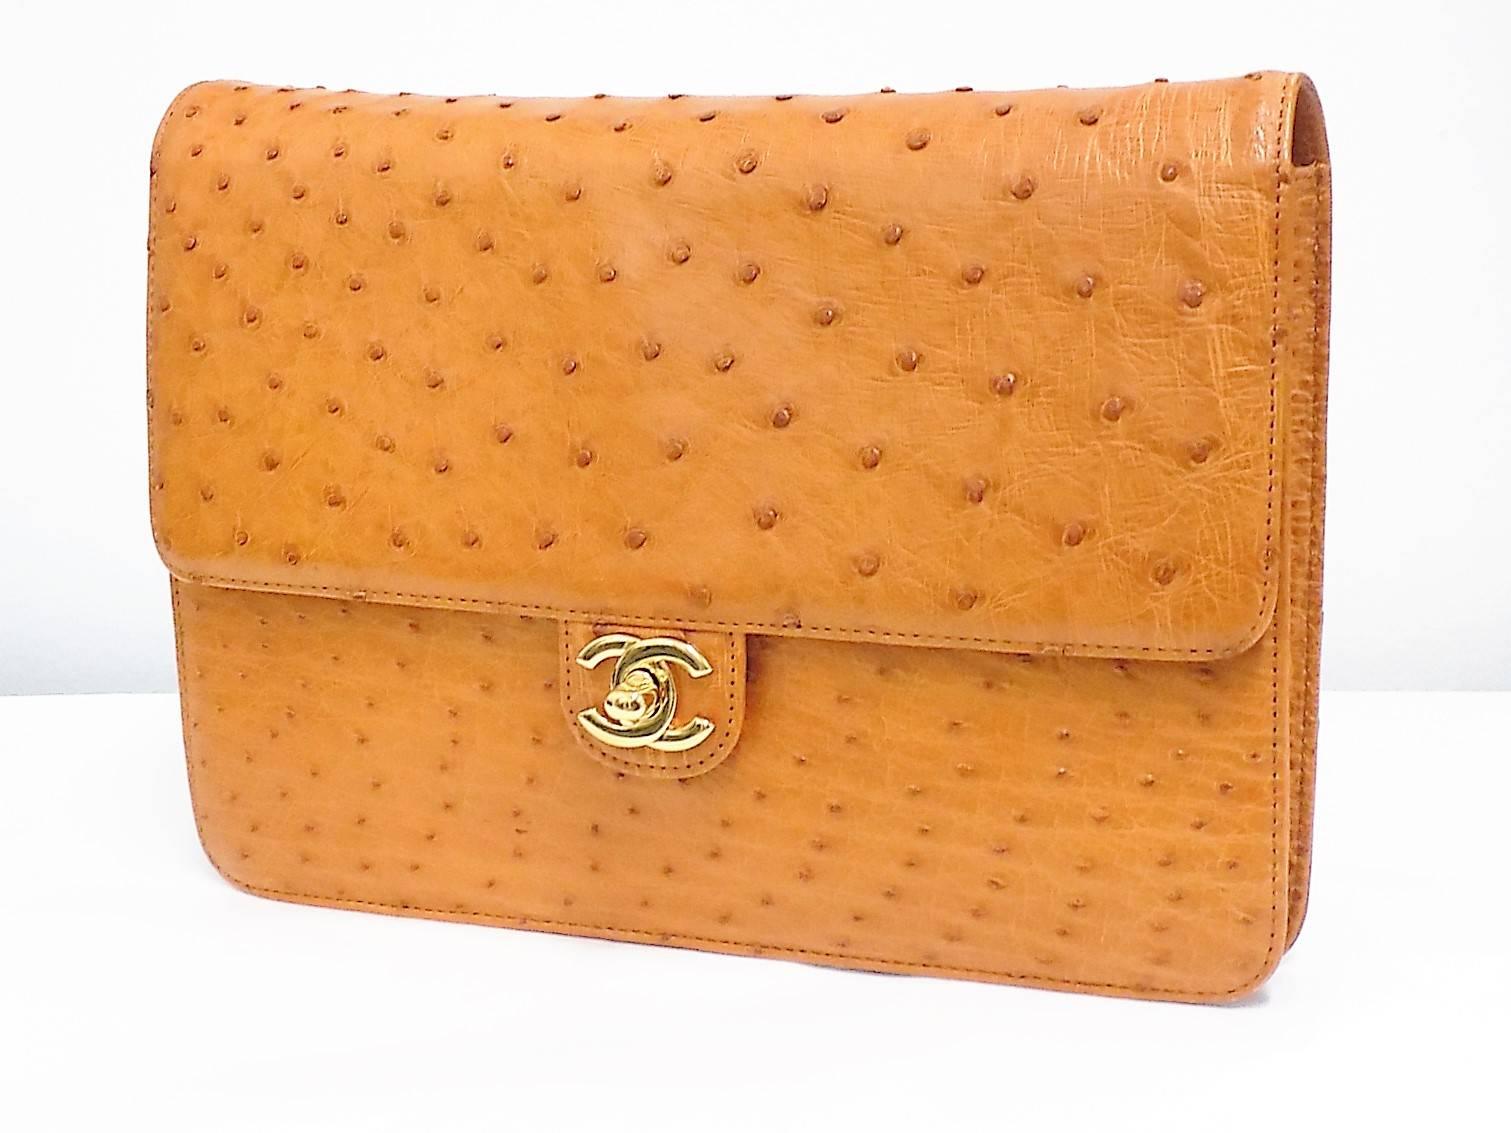 Spectacular and very rare!  1000% authenticity guaranteed in pristine condition. 
Warm cognac color flap style with classic Chanel chain that could be removed or stored in the bag hence used as a clutch.  This is one of my favorite bag so far in